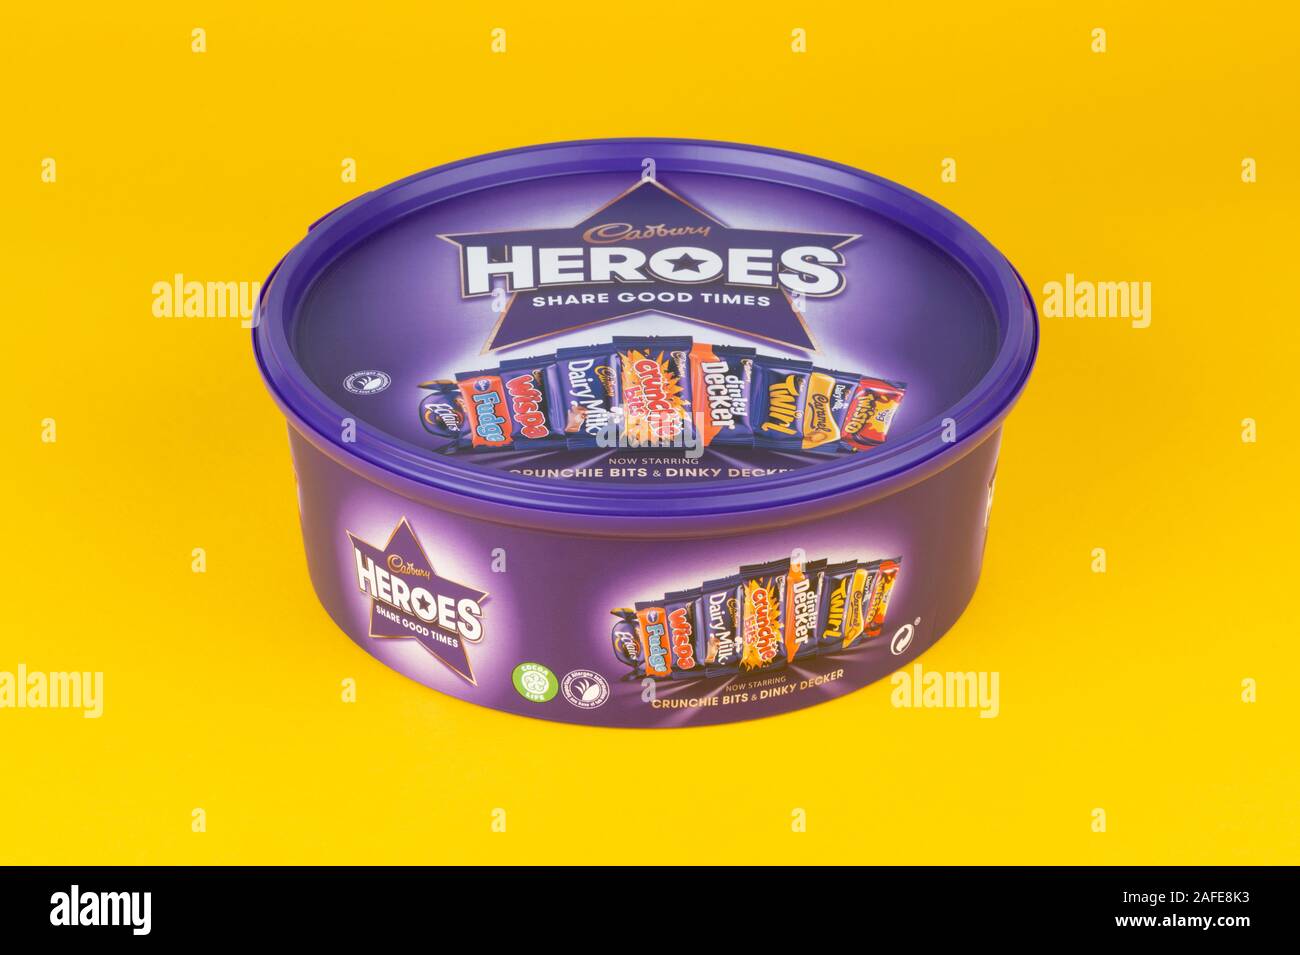 A box of Cadburys Heroes chocolate confectionery shot on a yellow background. Stock Photo